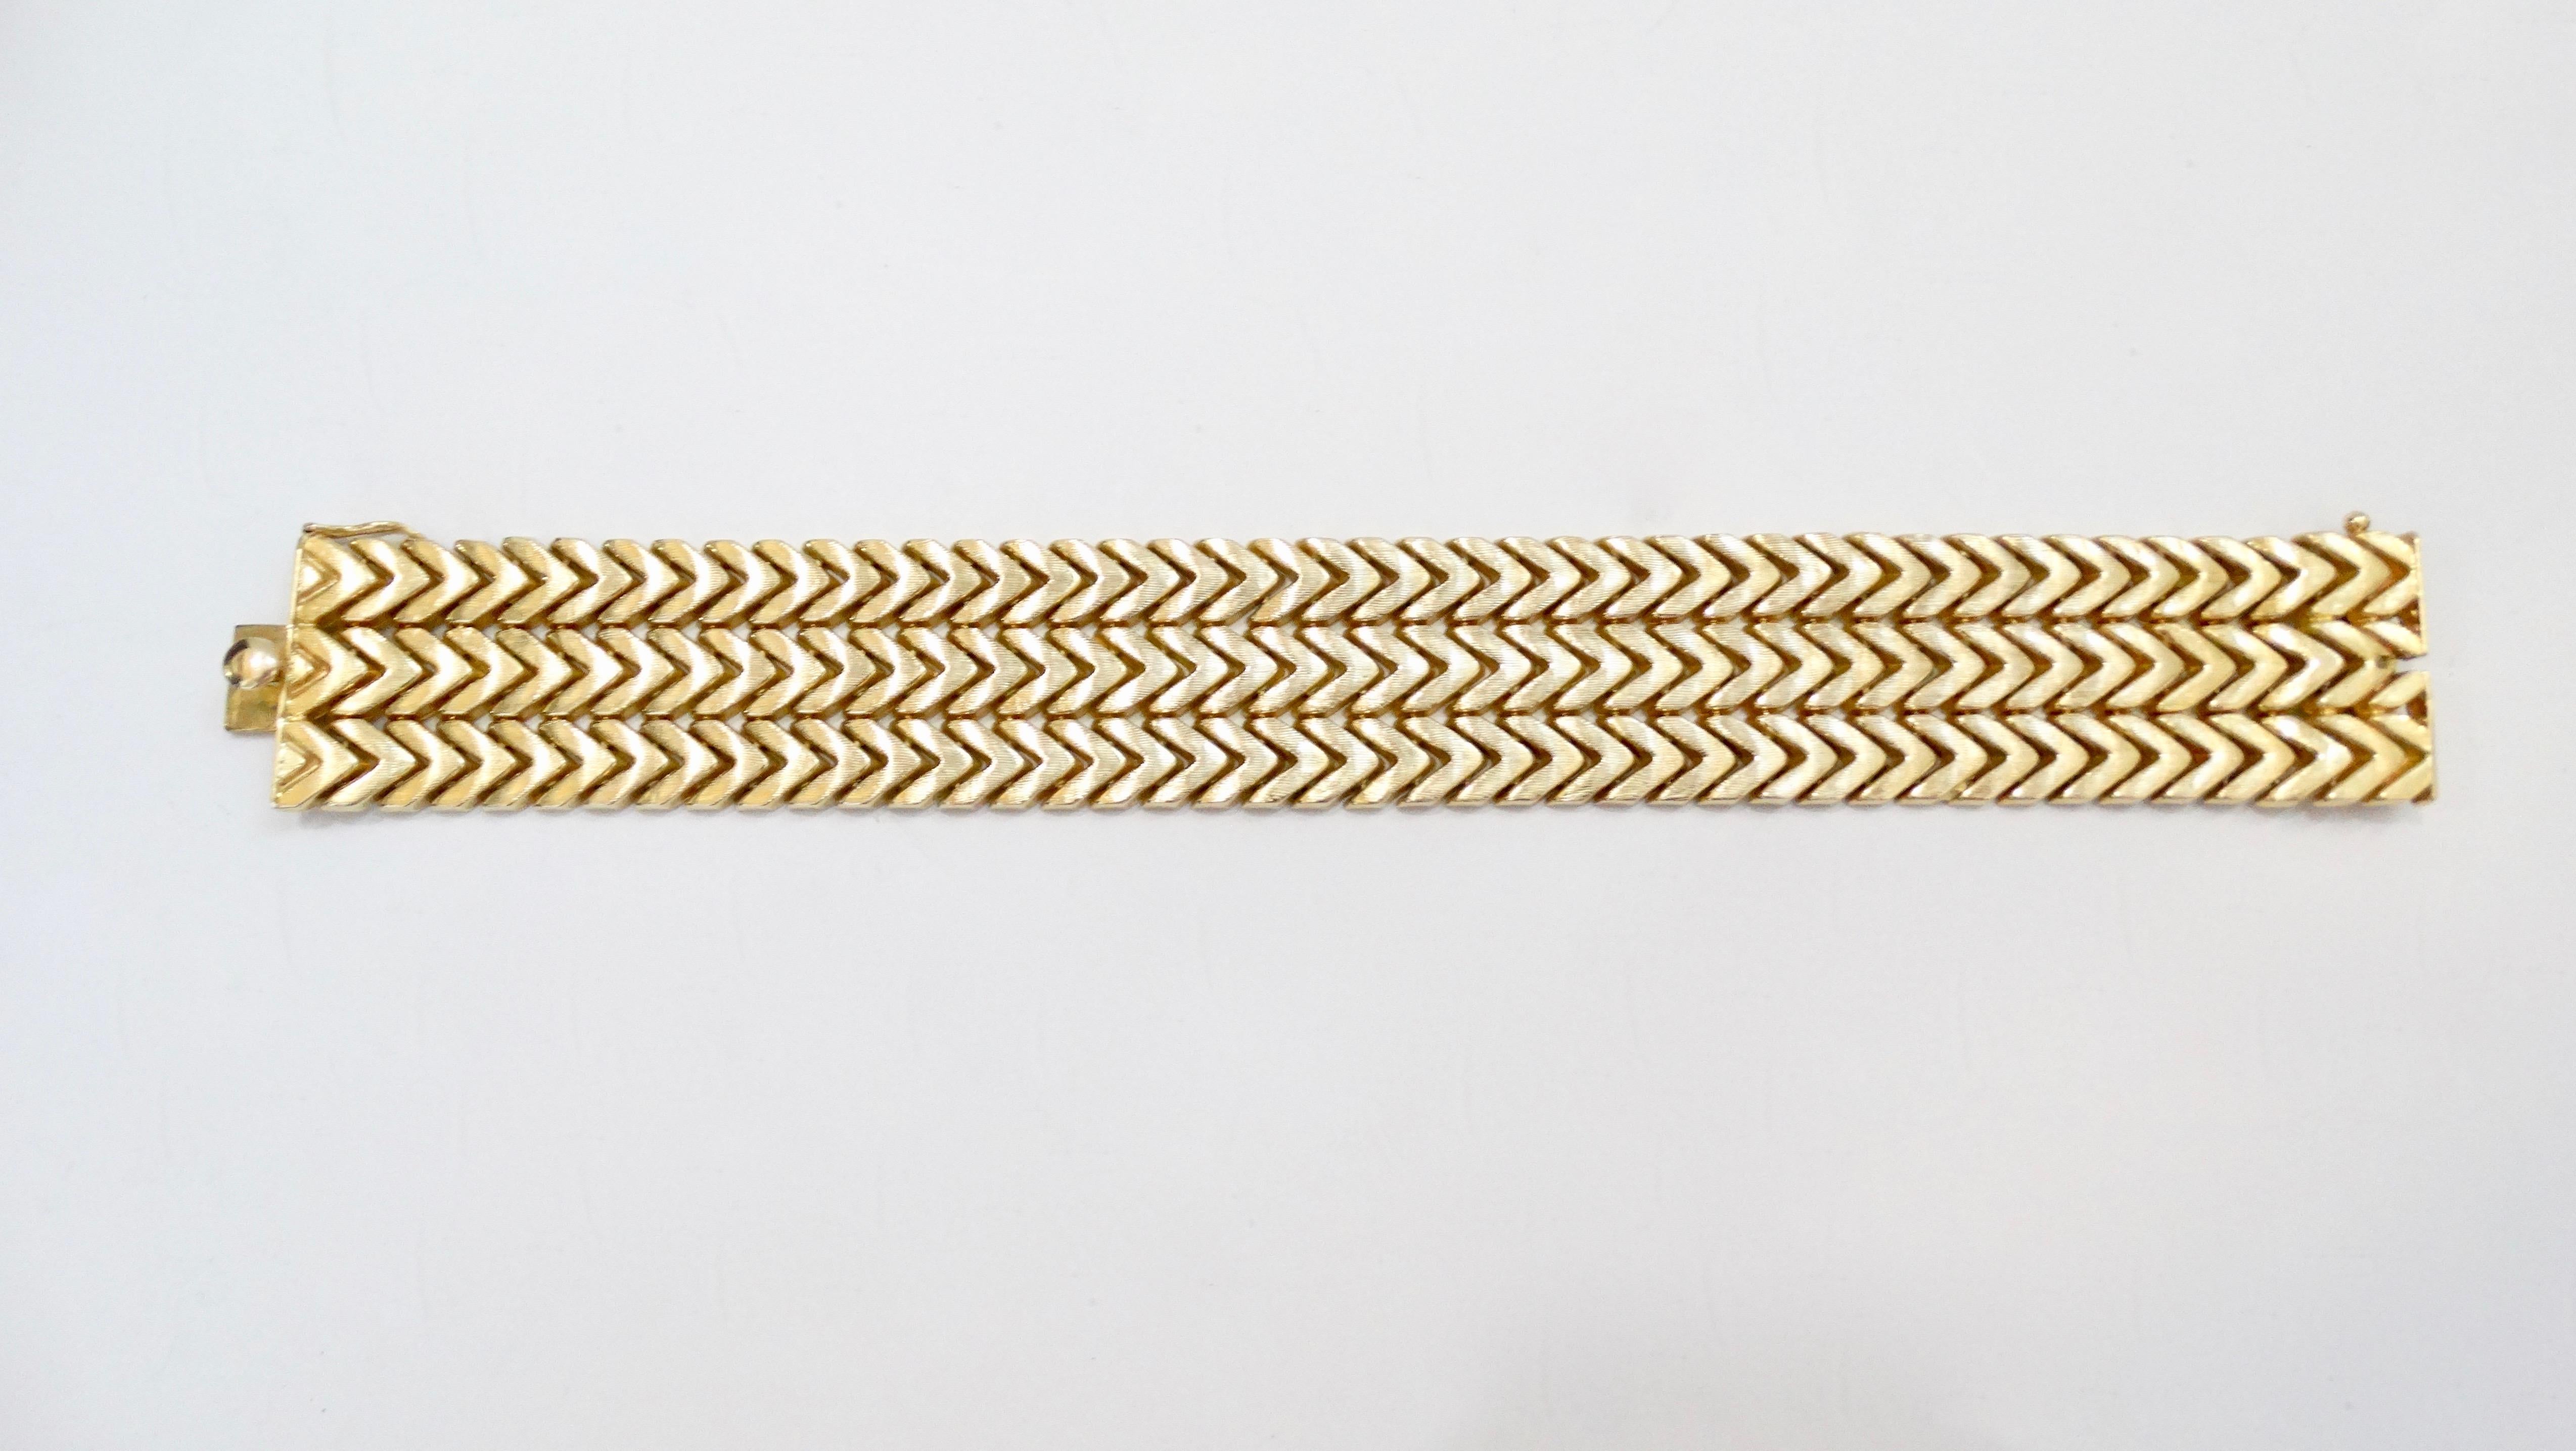 Gorgeous 18k Yellow Gold bracelet with a 3 row chevron design, box clasp closure and security clip. Stamped 750 and total weight in grams is 52. Perfect for layering or wearing alone! 